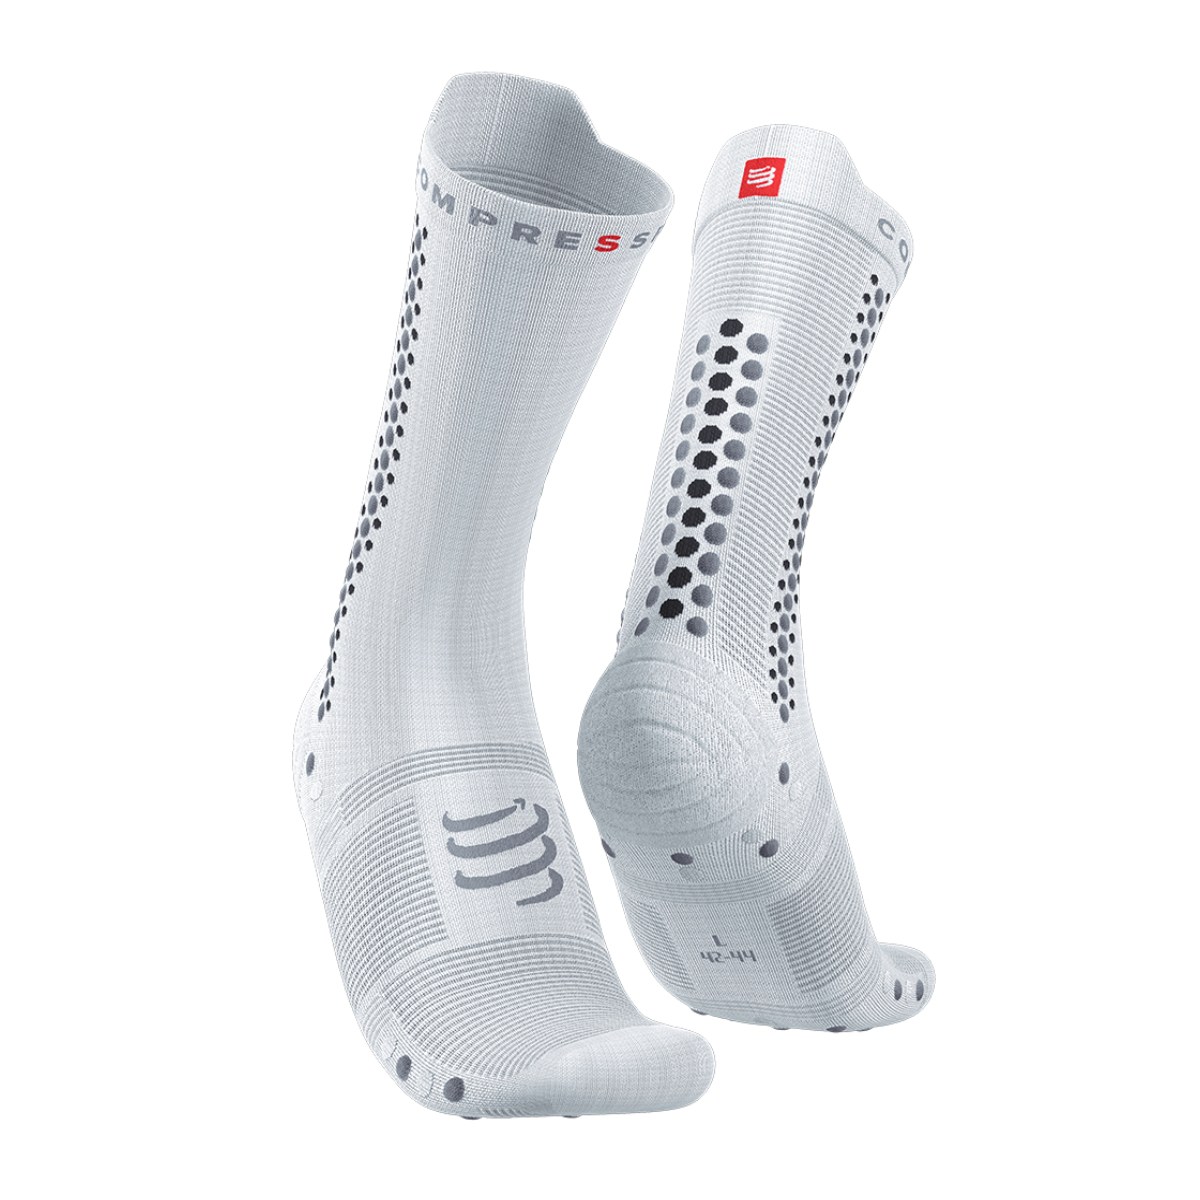 CHAUSSETTES COMPRESSPORT PRO RACING V4 VELO